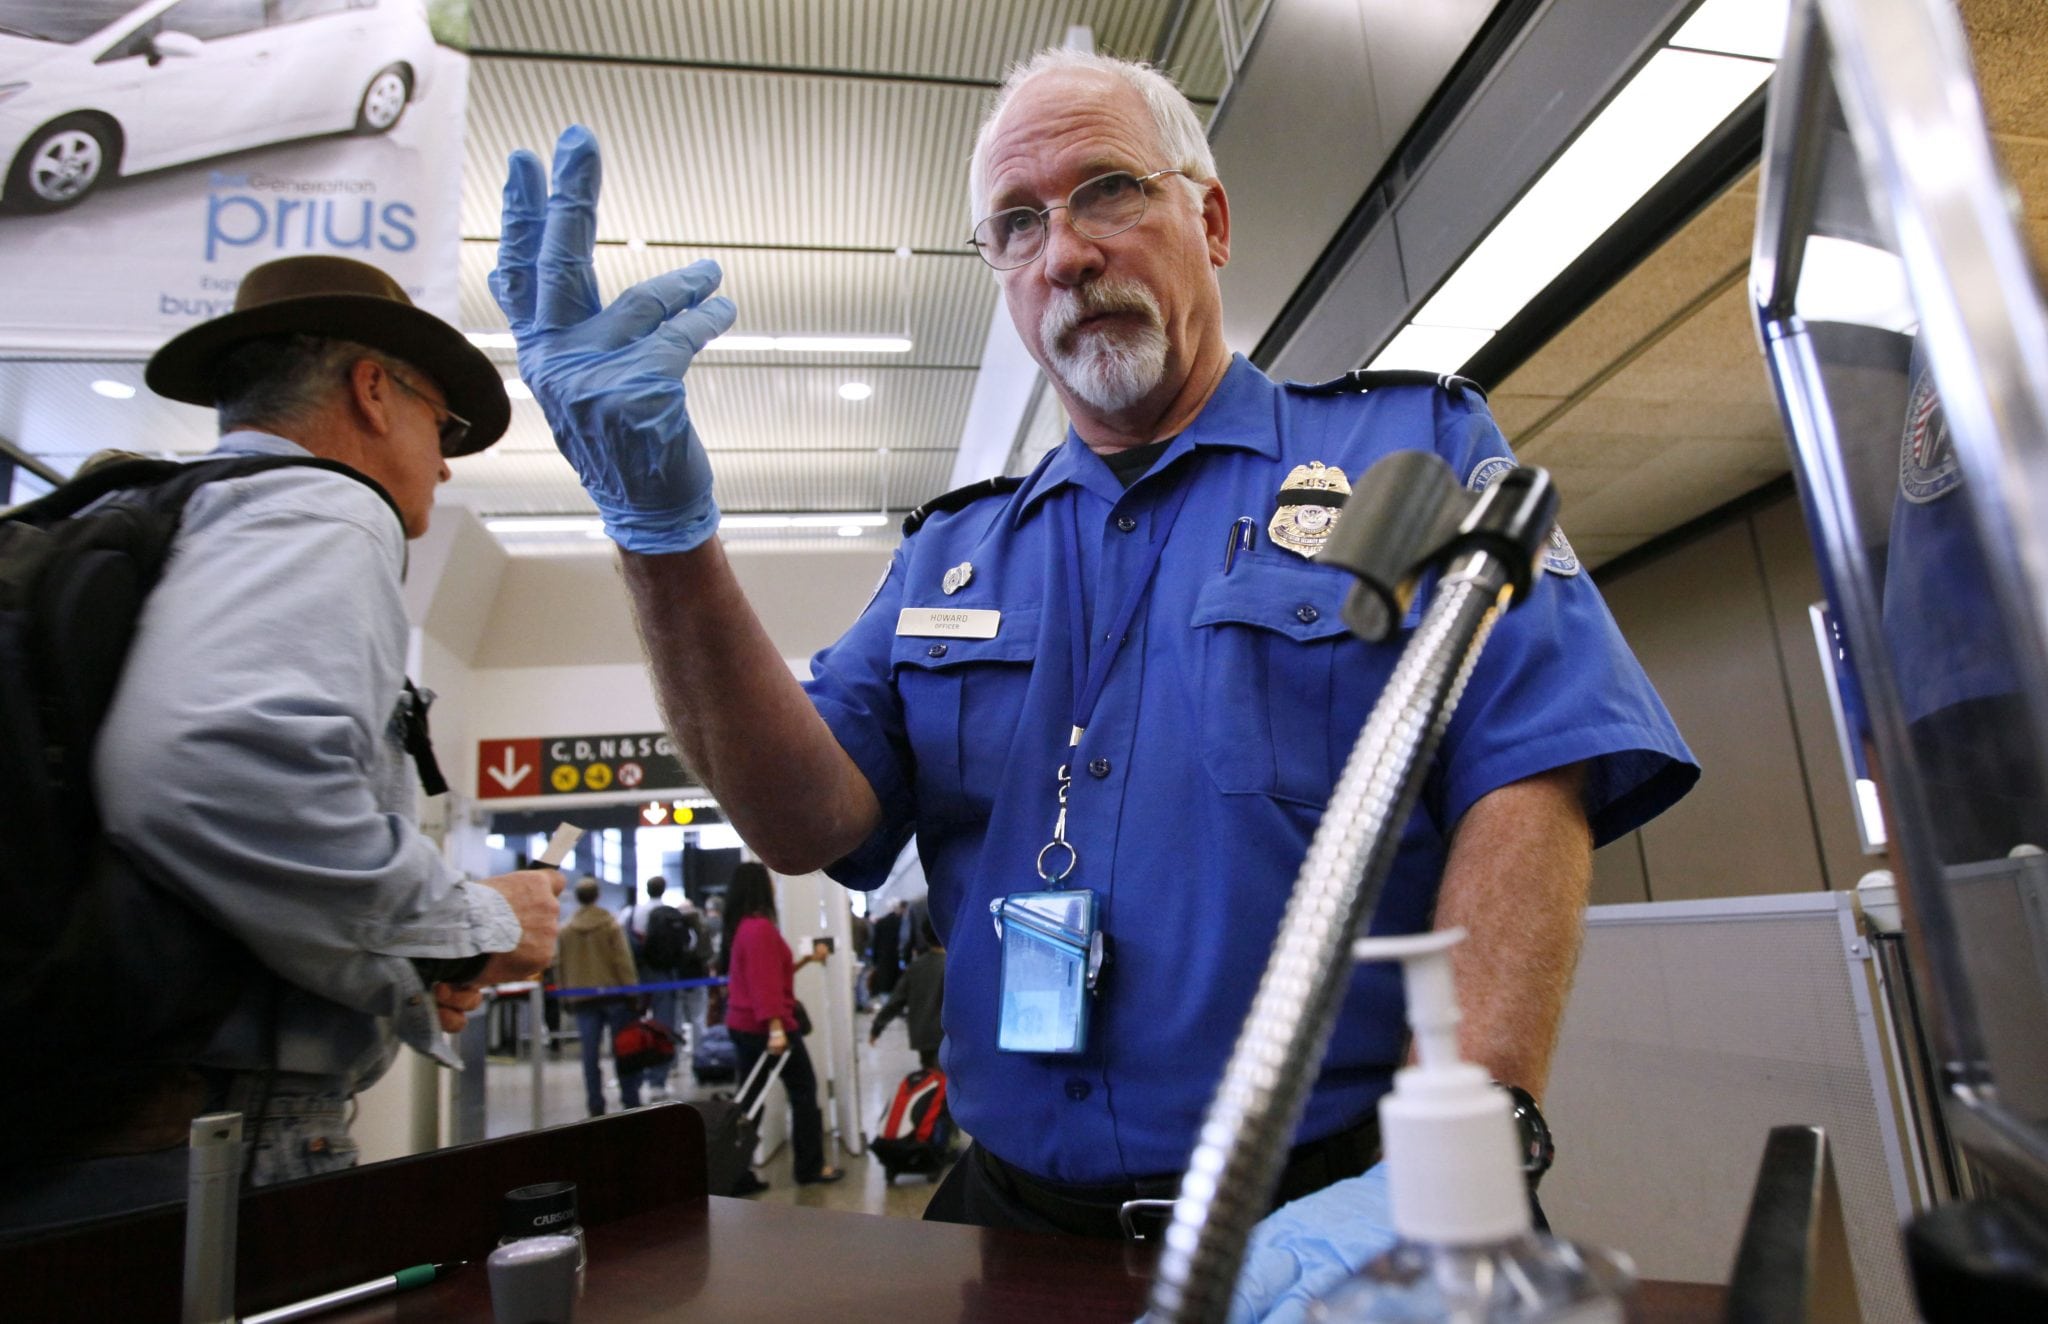 The TSA published a video to educate LGBTQ travelers, but still doesn't seem to understand non-binary gender identity. In this Jan. 4, 2010 file photo, TSA officer Robert Howard signals an airline passenger forward at a security check-point at Seattle-Tacoma International Airport in SeaTac, Wash.